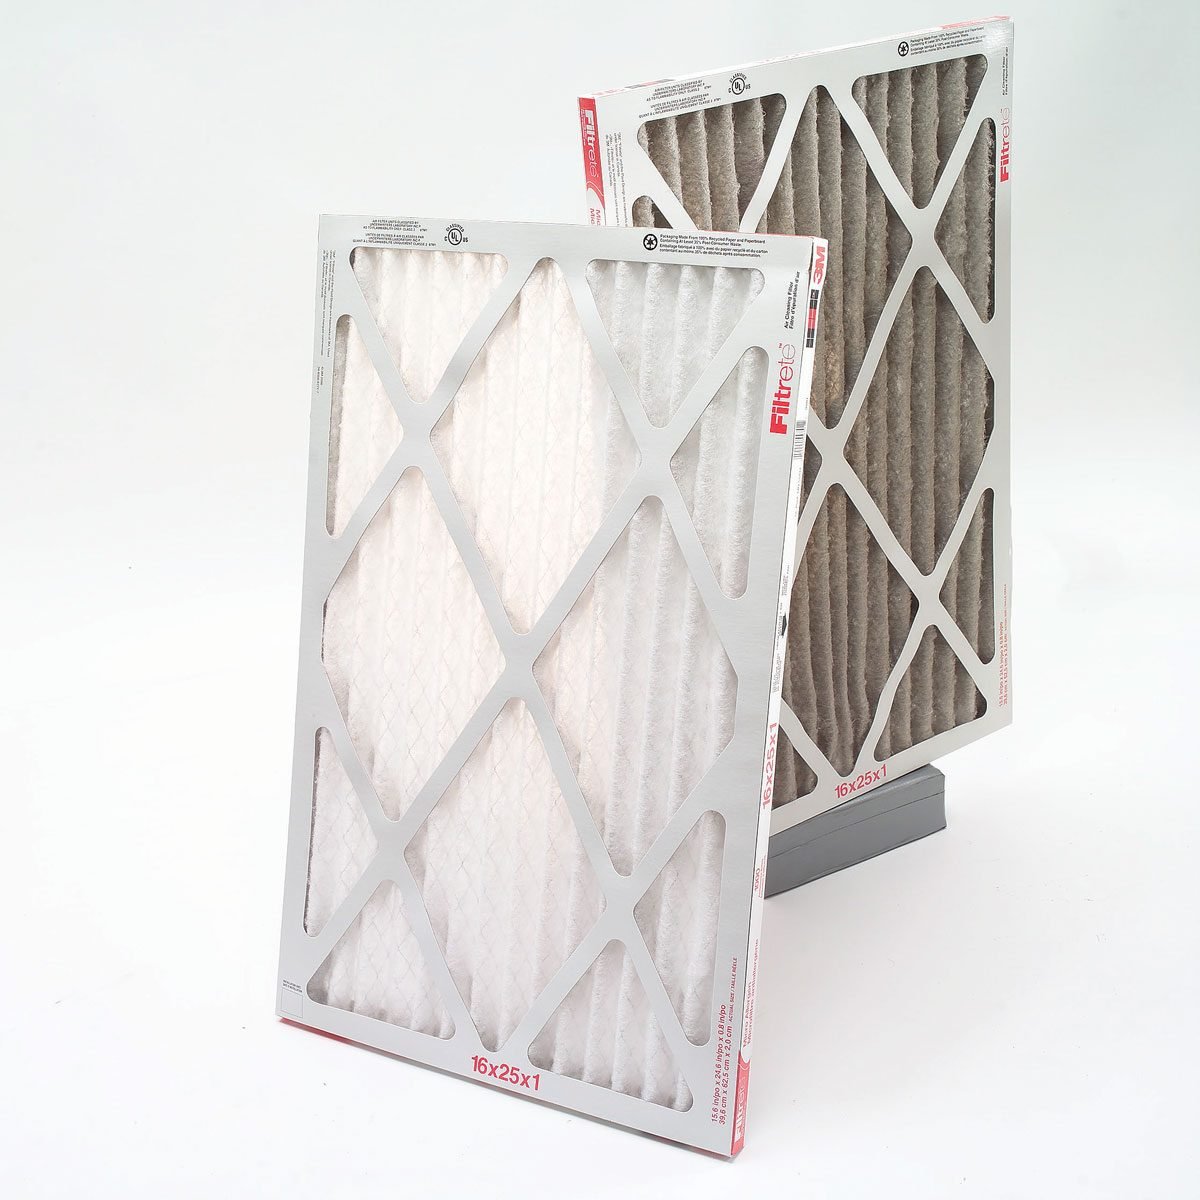 Replace the Furnace Filter